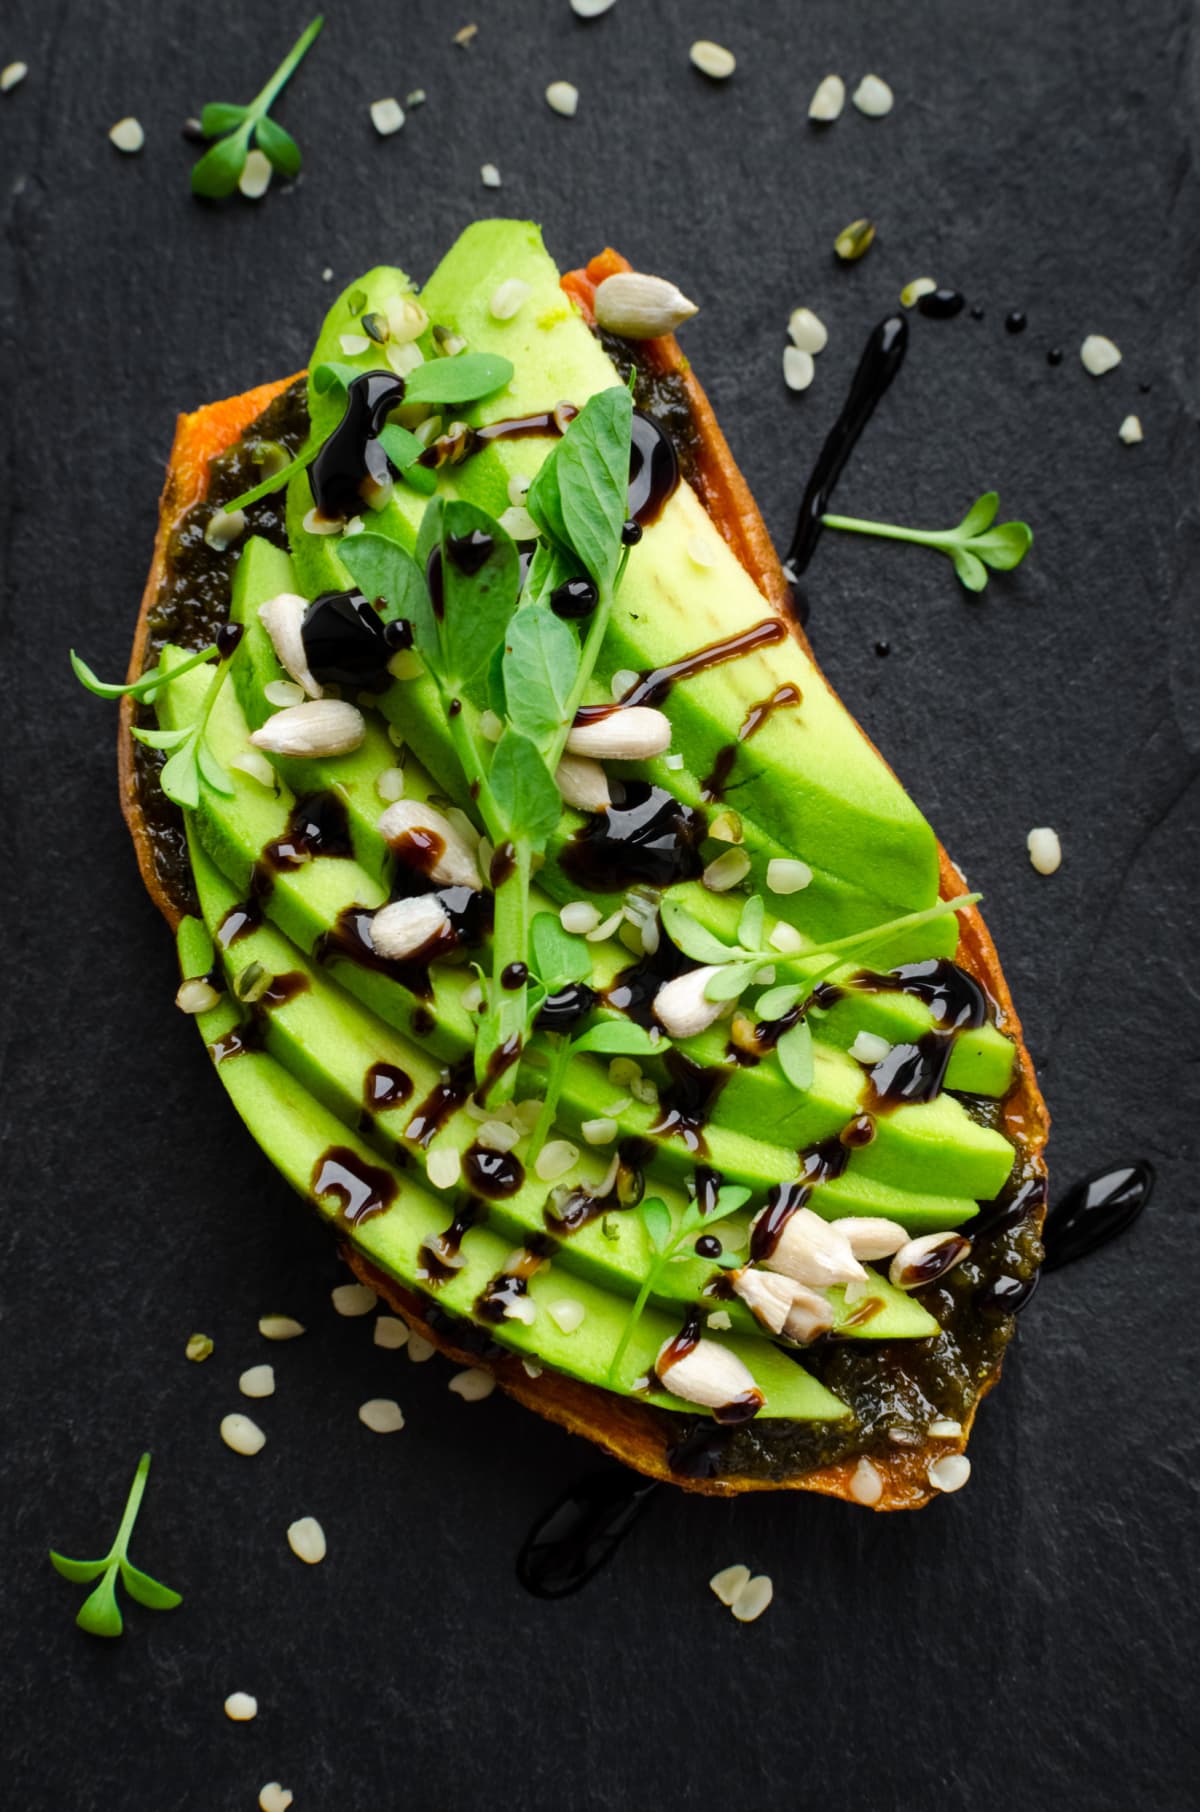 Toast with avocado slices and garnishes